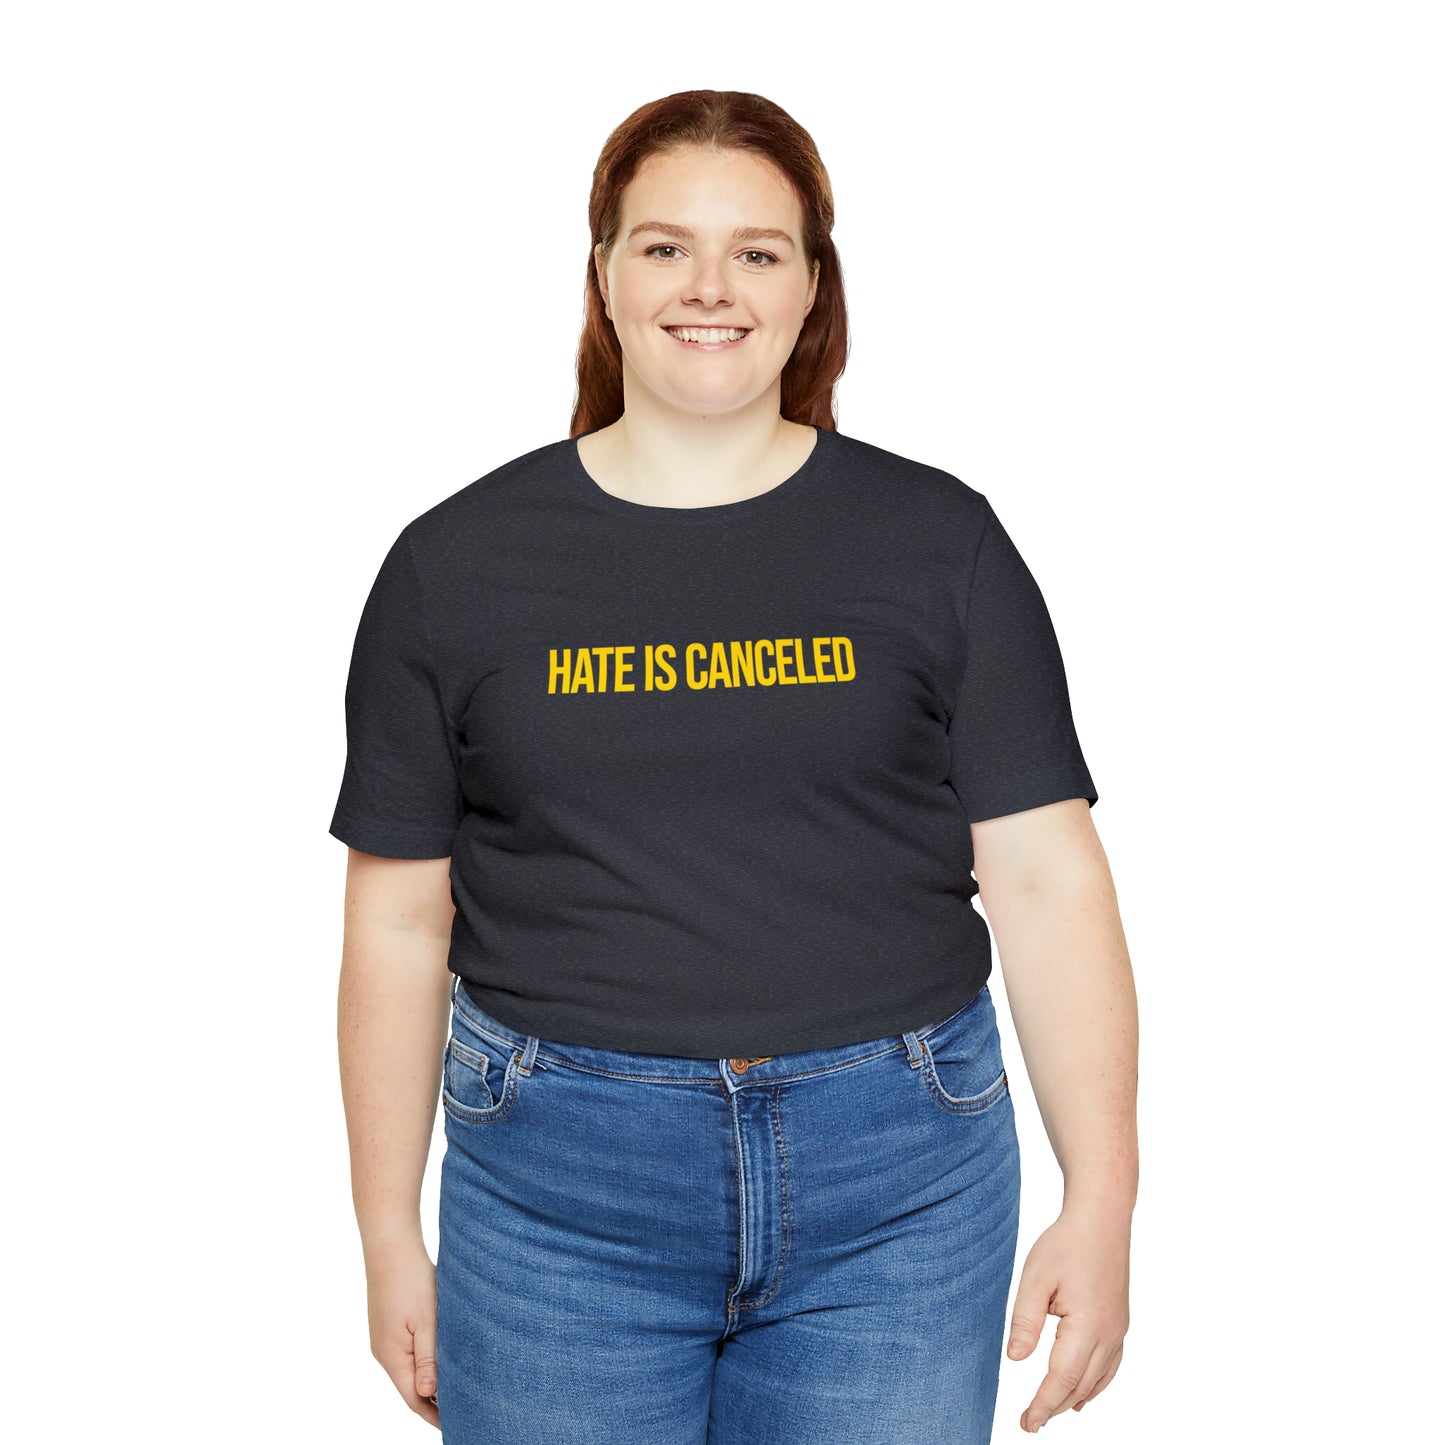 Hate Is Canceled - Unisex Pride T-Shirt